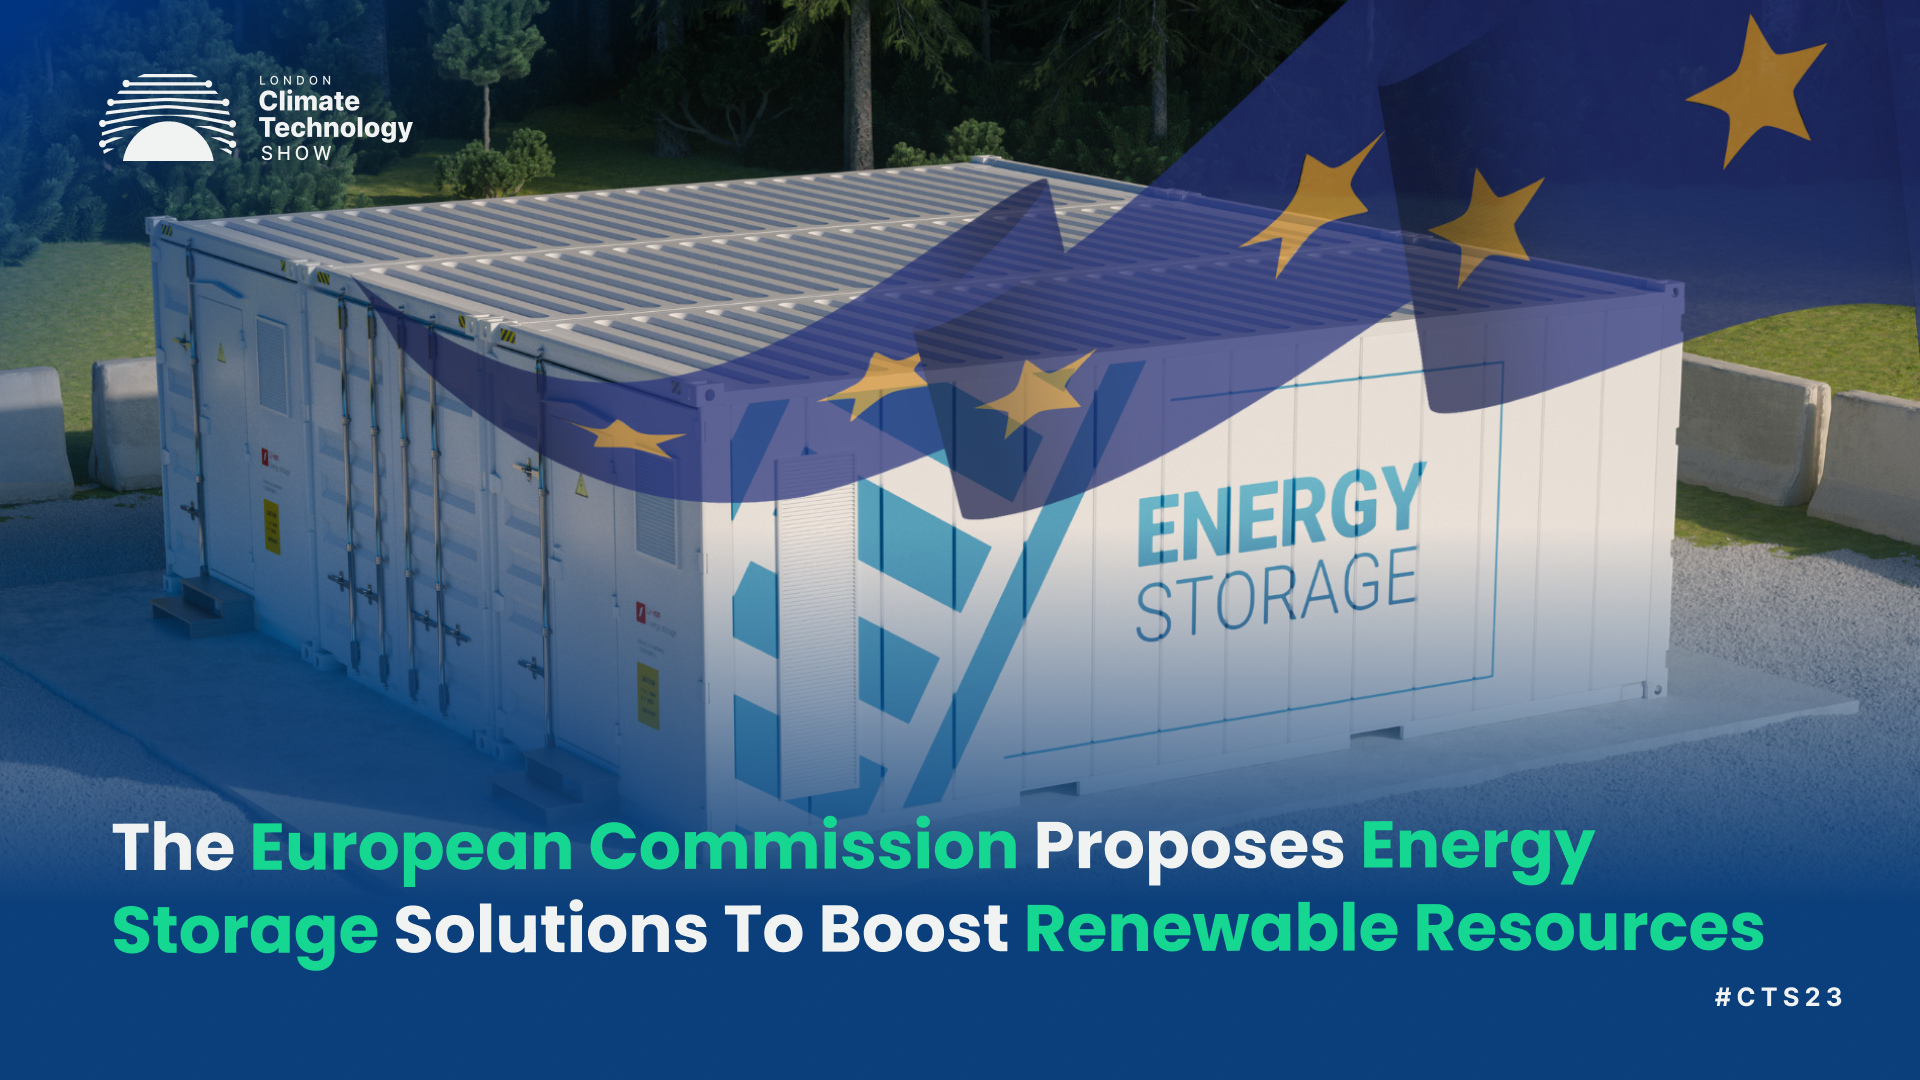 The European Commission Proposes Energy Storage Solutions To Boost Renewable Resources